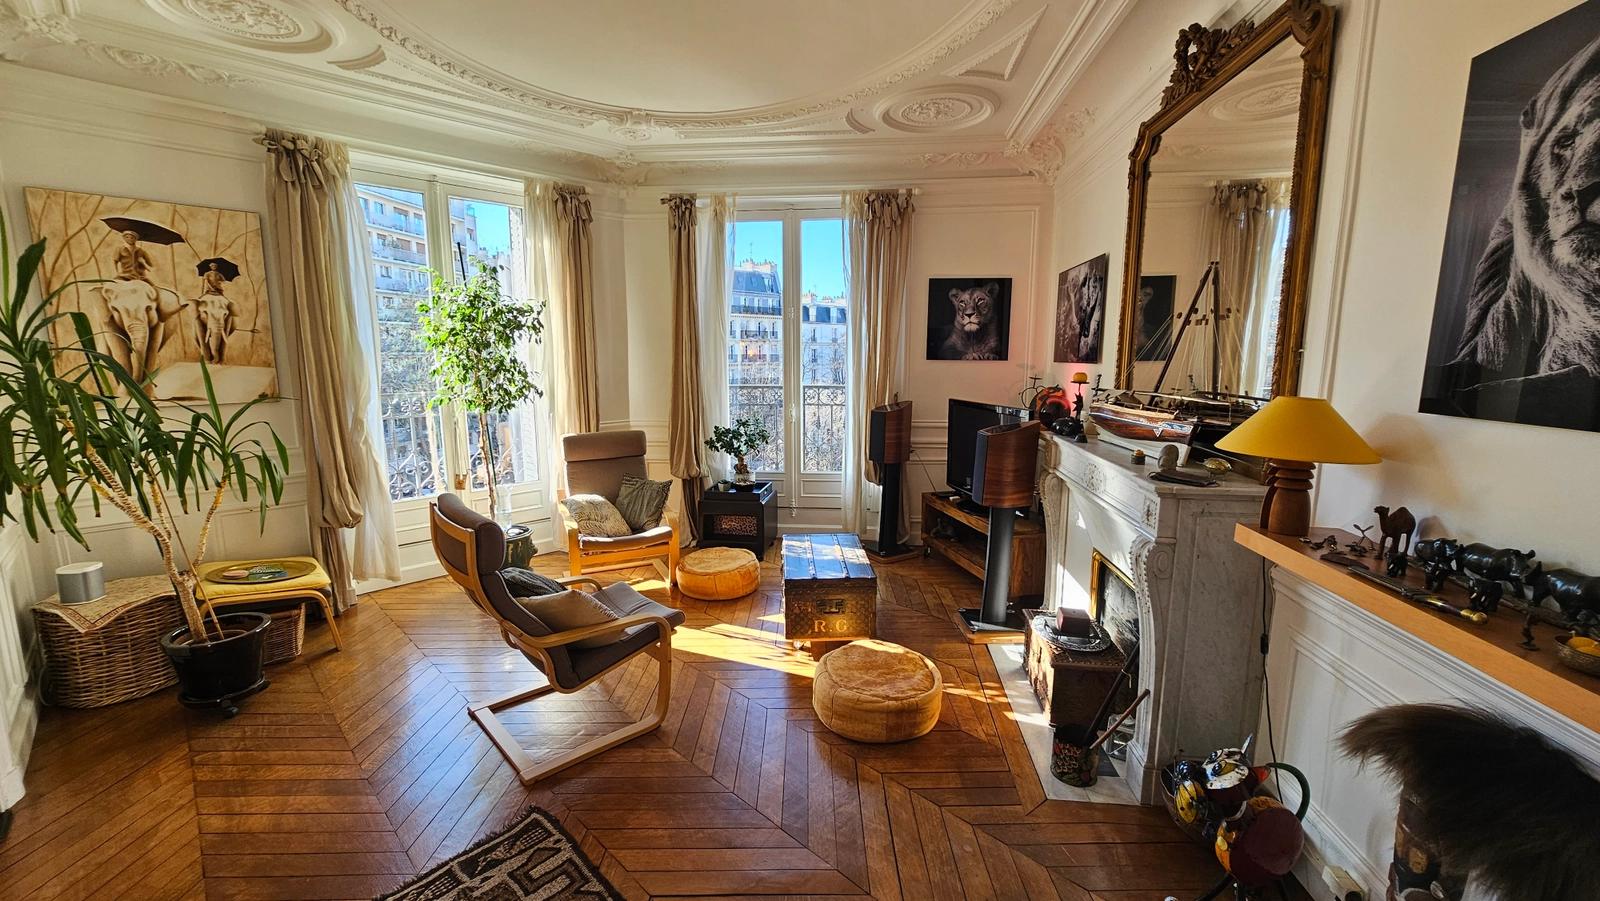 Space Haussmannian apartment with exotic decor - 1